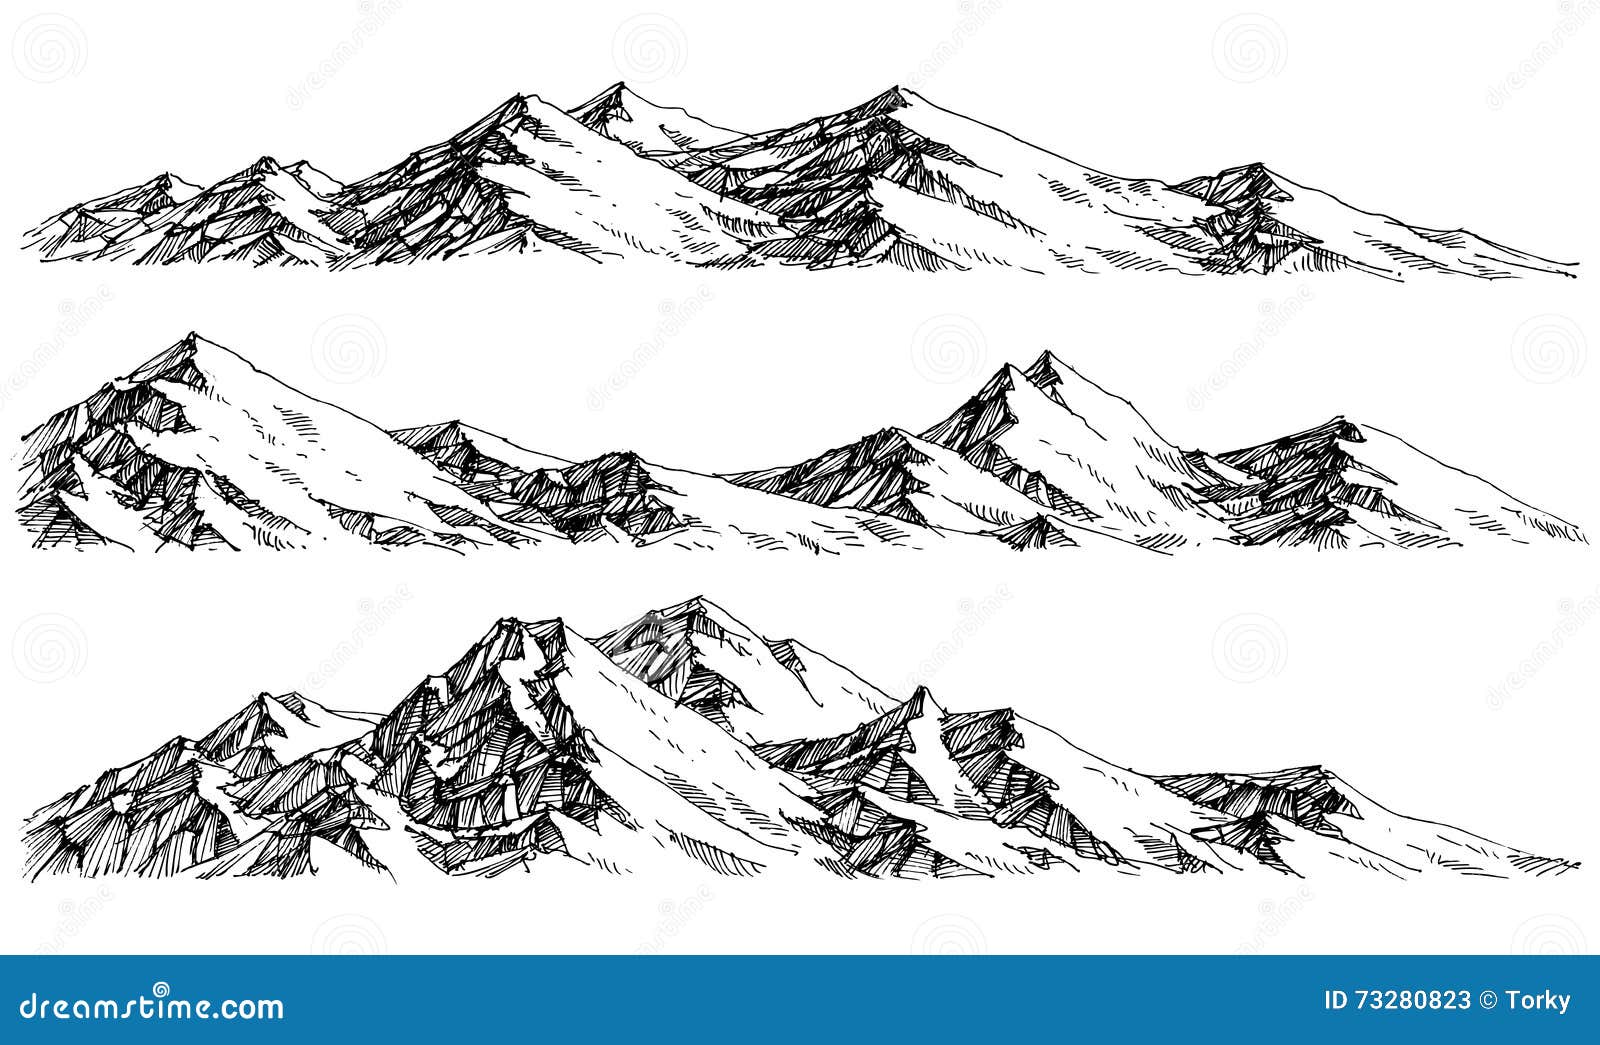 Outline Drawings Mountains Nature Sketch VECTOR Illustrations Set Black  Contour Royalty Free SVG Cliparts Vectors And Stock Illustration Image  79937421